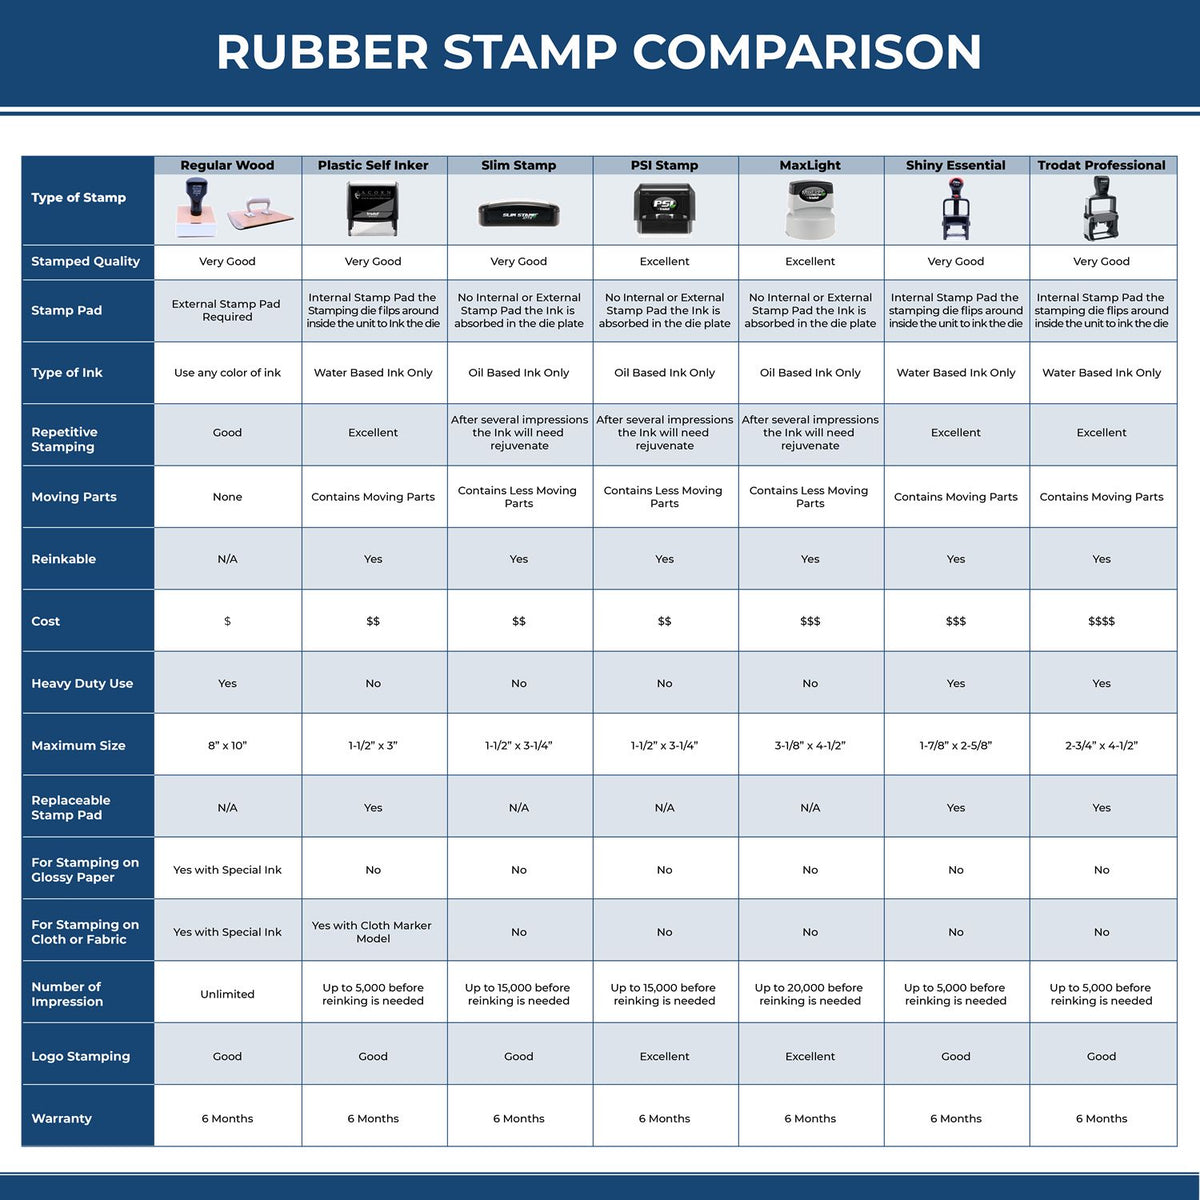 Large Managed Care Rubber Stamp 4524R Rubber Stamp Comparison